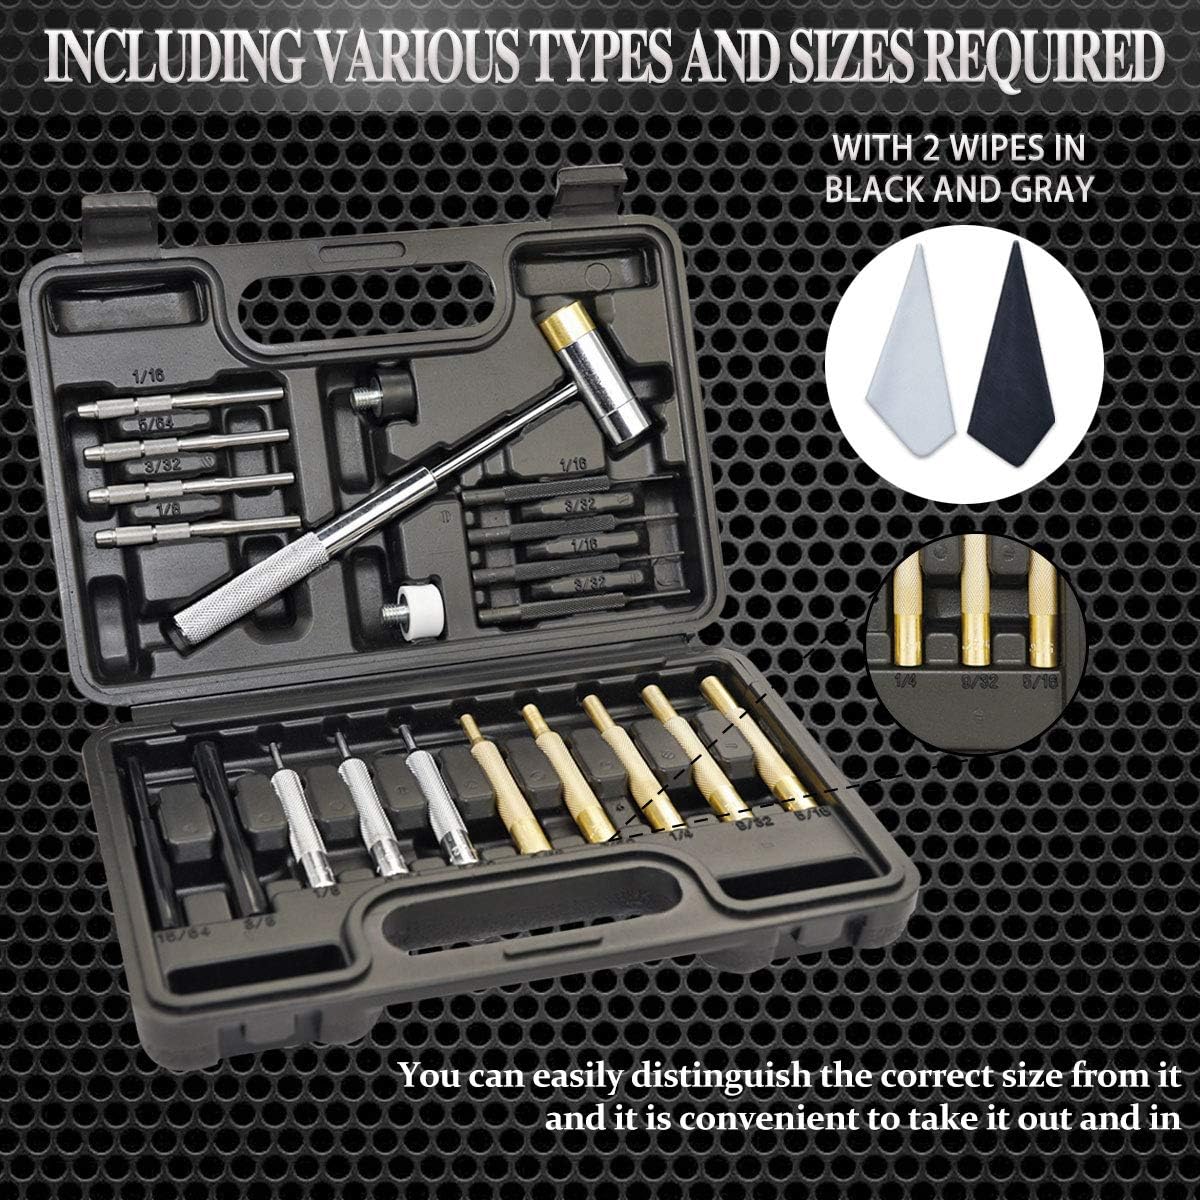 BESTNULE Punch Set, Punch Tools, Roll Pin Punch Set, Made of Solid Material Including Steel Punch and Hammer, Ideal for Machinery Mainte